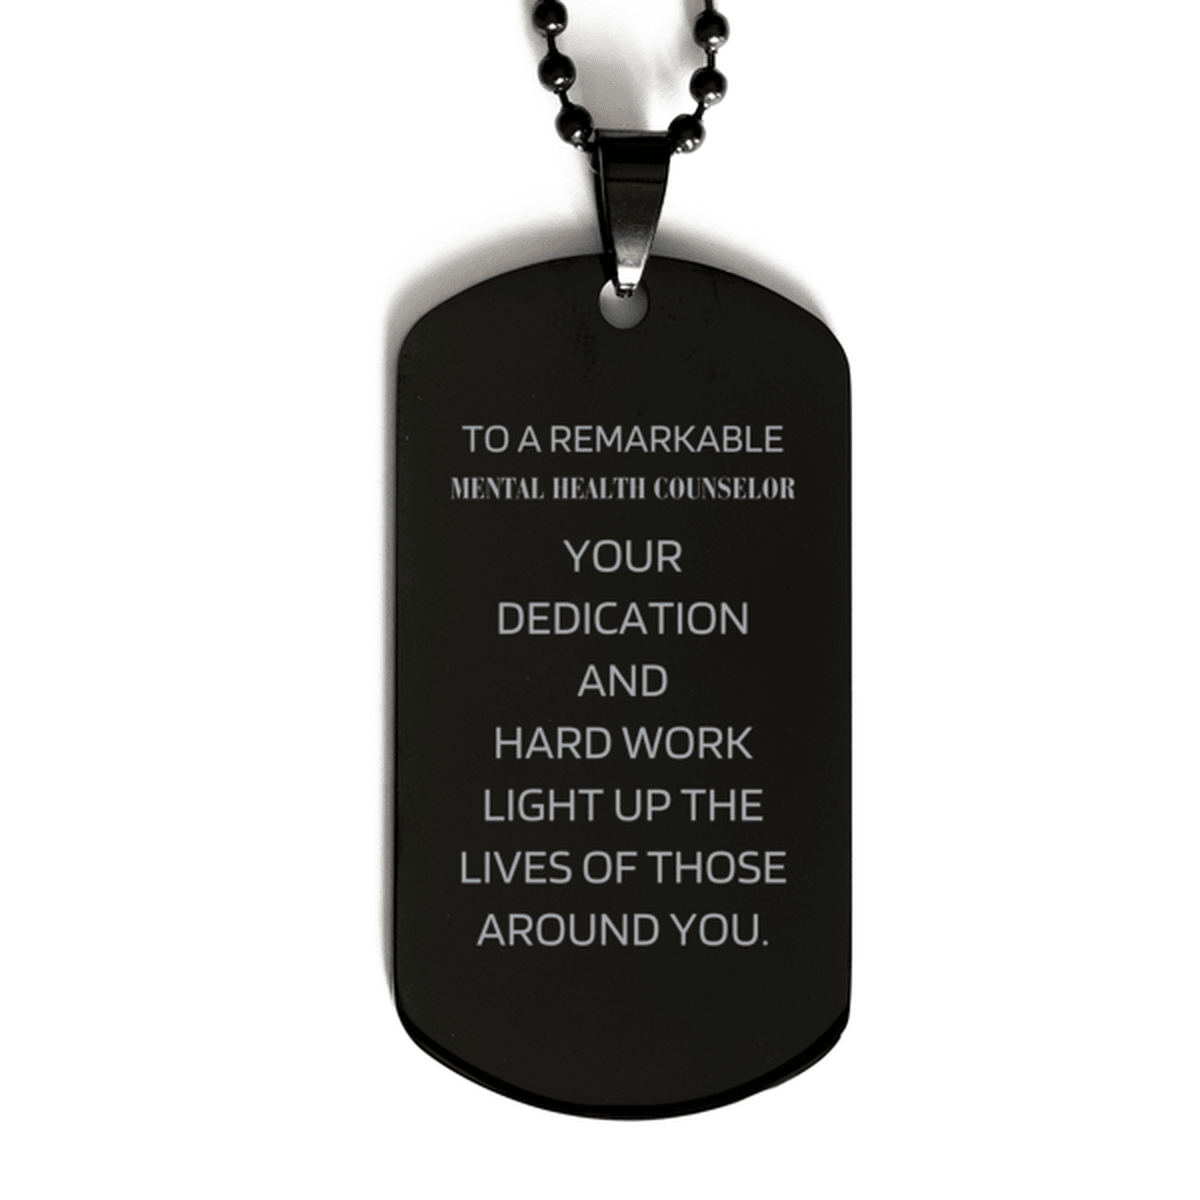 Remarkable Mental Health Counselor Gifts, Your dedication and hard work, Inspirational Birthday Christmas Unique Black Dog Tag For Mental Health Counselor, Coworkers, Men, Women, Friends - Mallard Moon Gift Shop